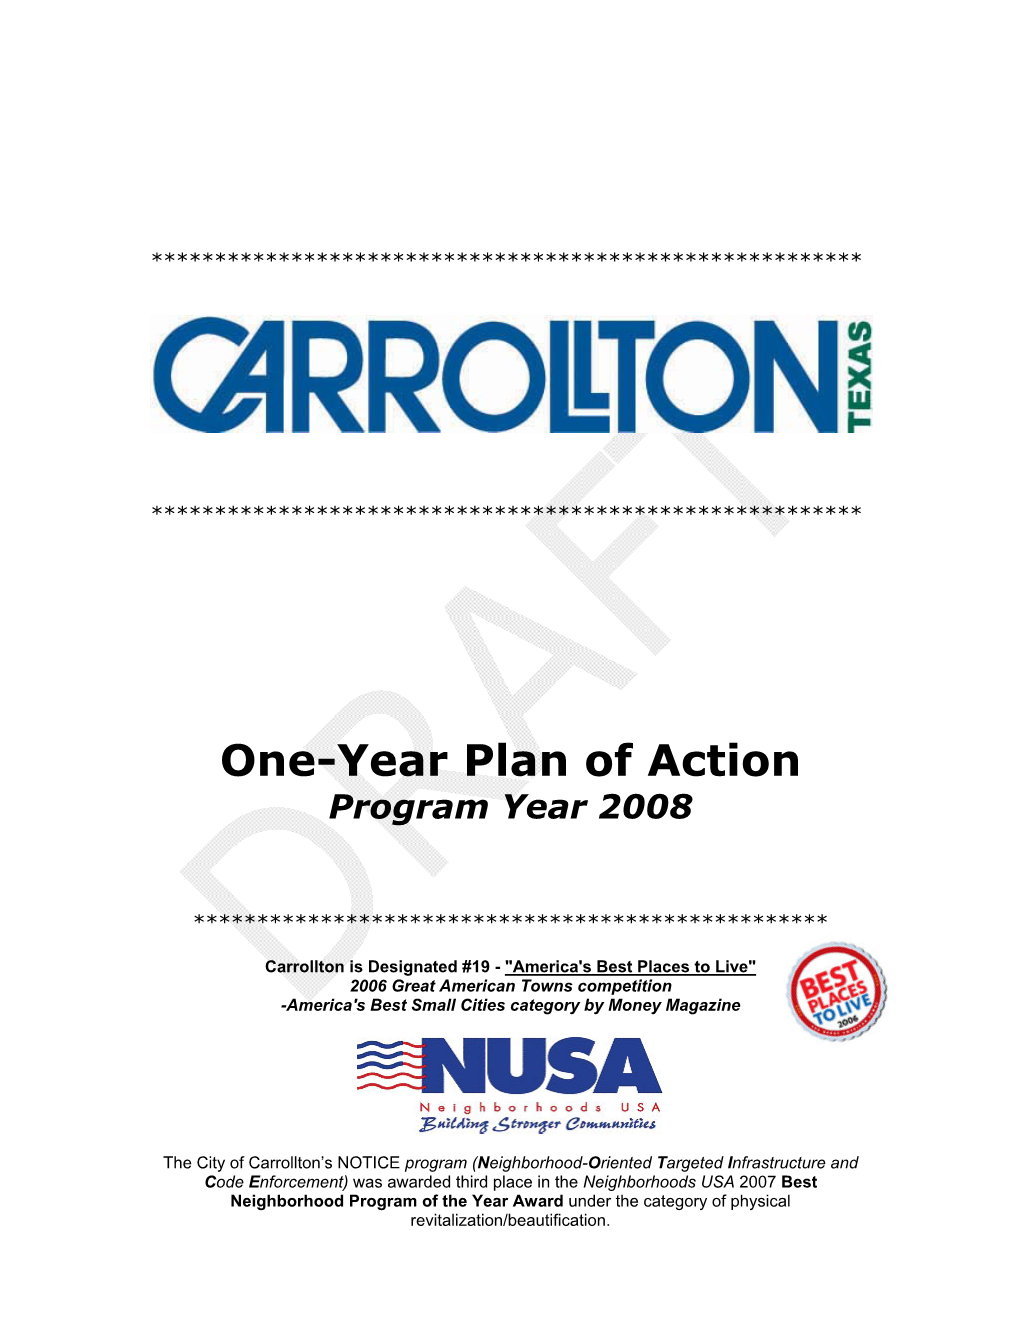 One-Year Plan of Action Program Year 2008